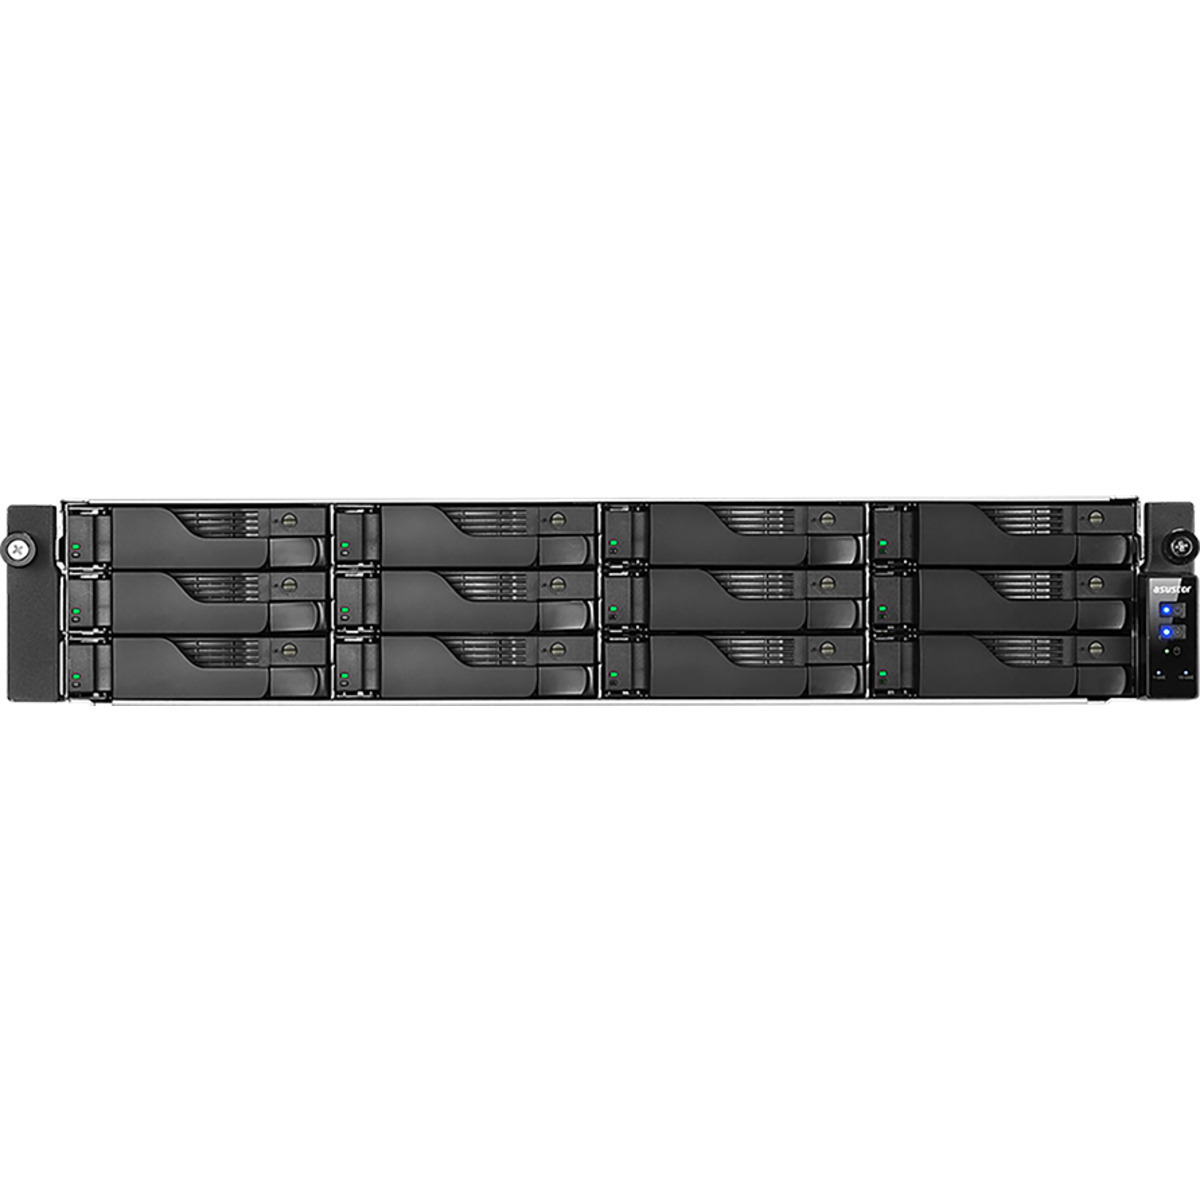 buy $5910 ASUSTOR LOCKERSTOR 12RD AS6512RD 144tb RackMount NAS - Network Attached Storage Device 12x12000gb Seagate IronWolf Pro ST12000NT001 3.5 7200rpm SATA 6Gb/s HDD NAS Class Drives Installed - Burn-In Tested - FREE RAM UPGRADE - nas headquarters buy network attached storage server device das new raid-5 free shipping simply usa LOCKERSTOR 12RD AS6512RD